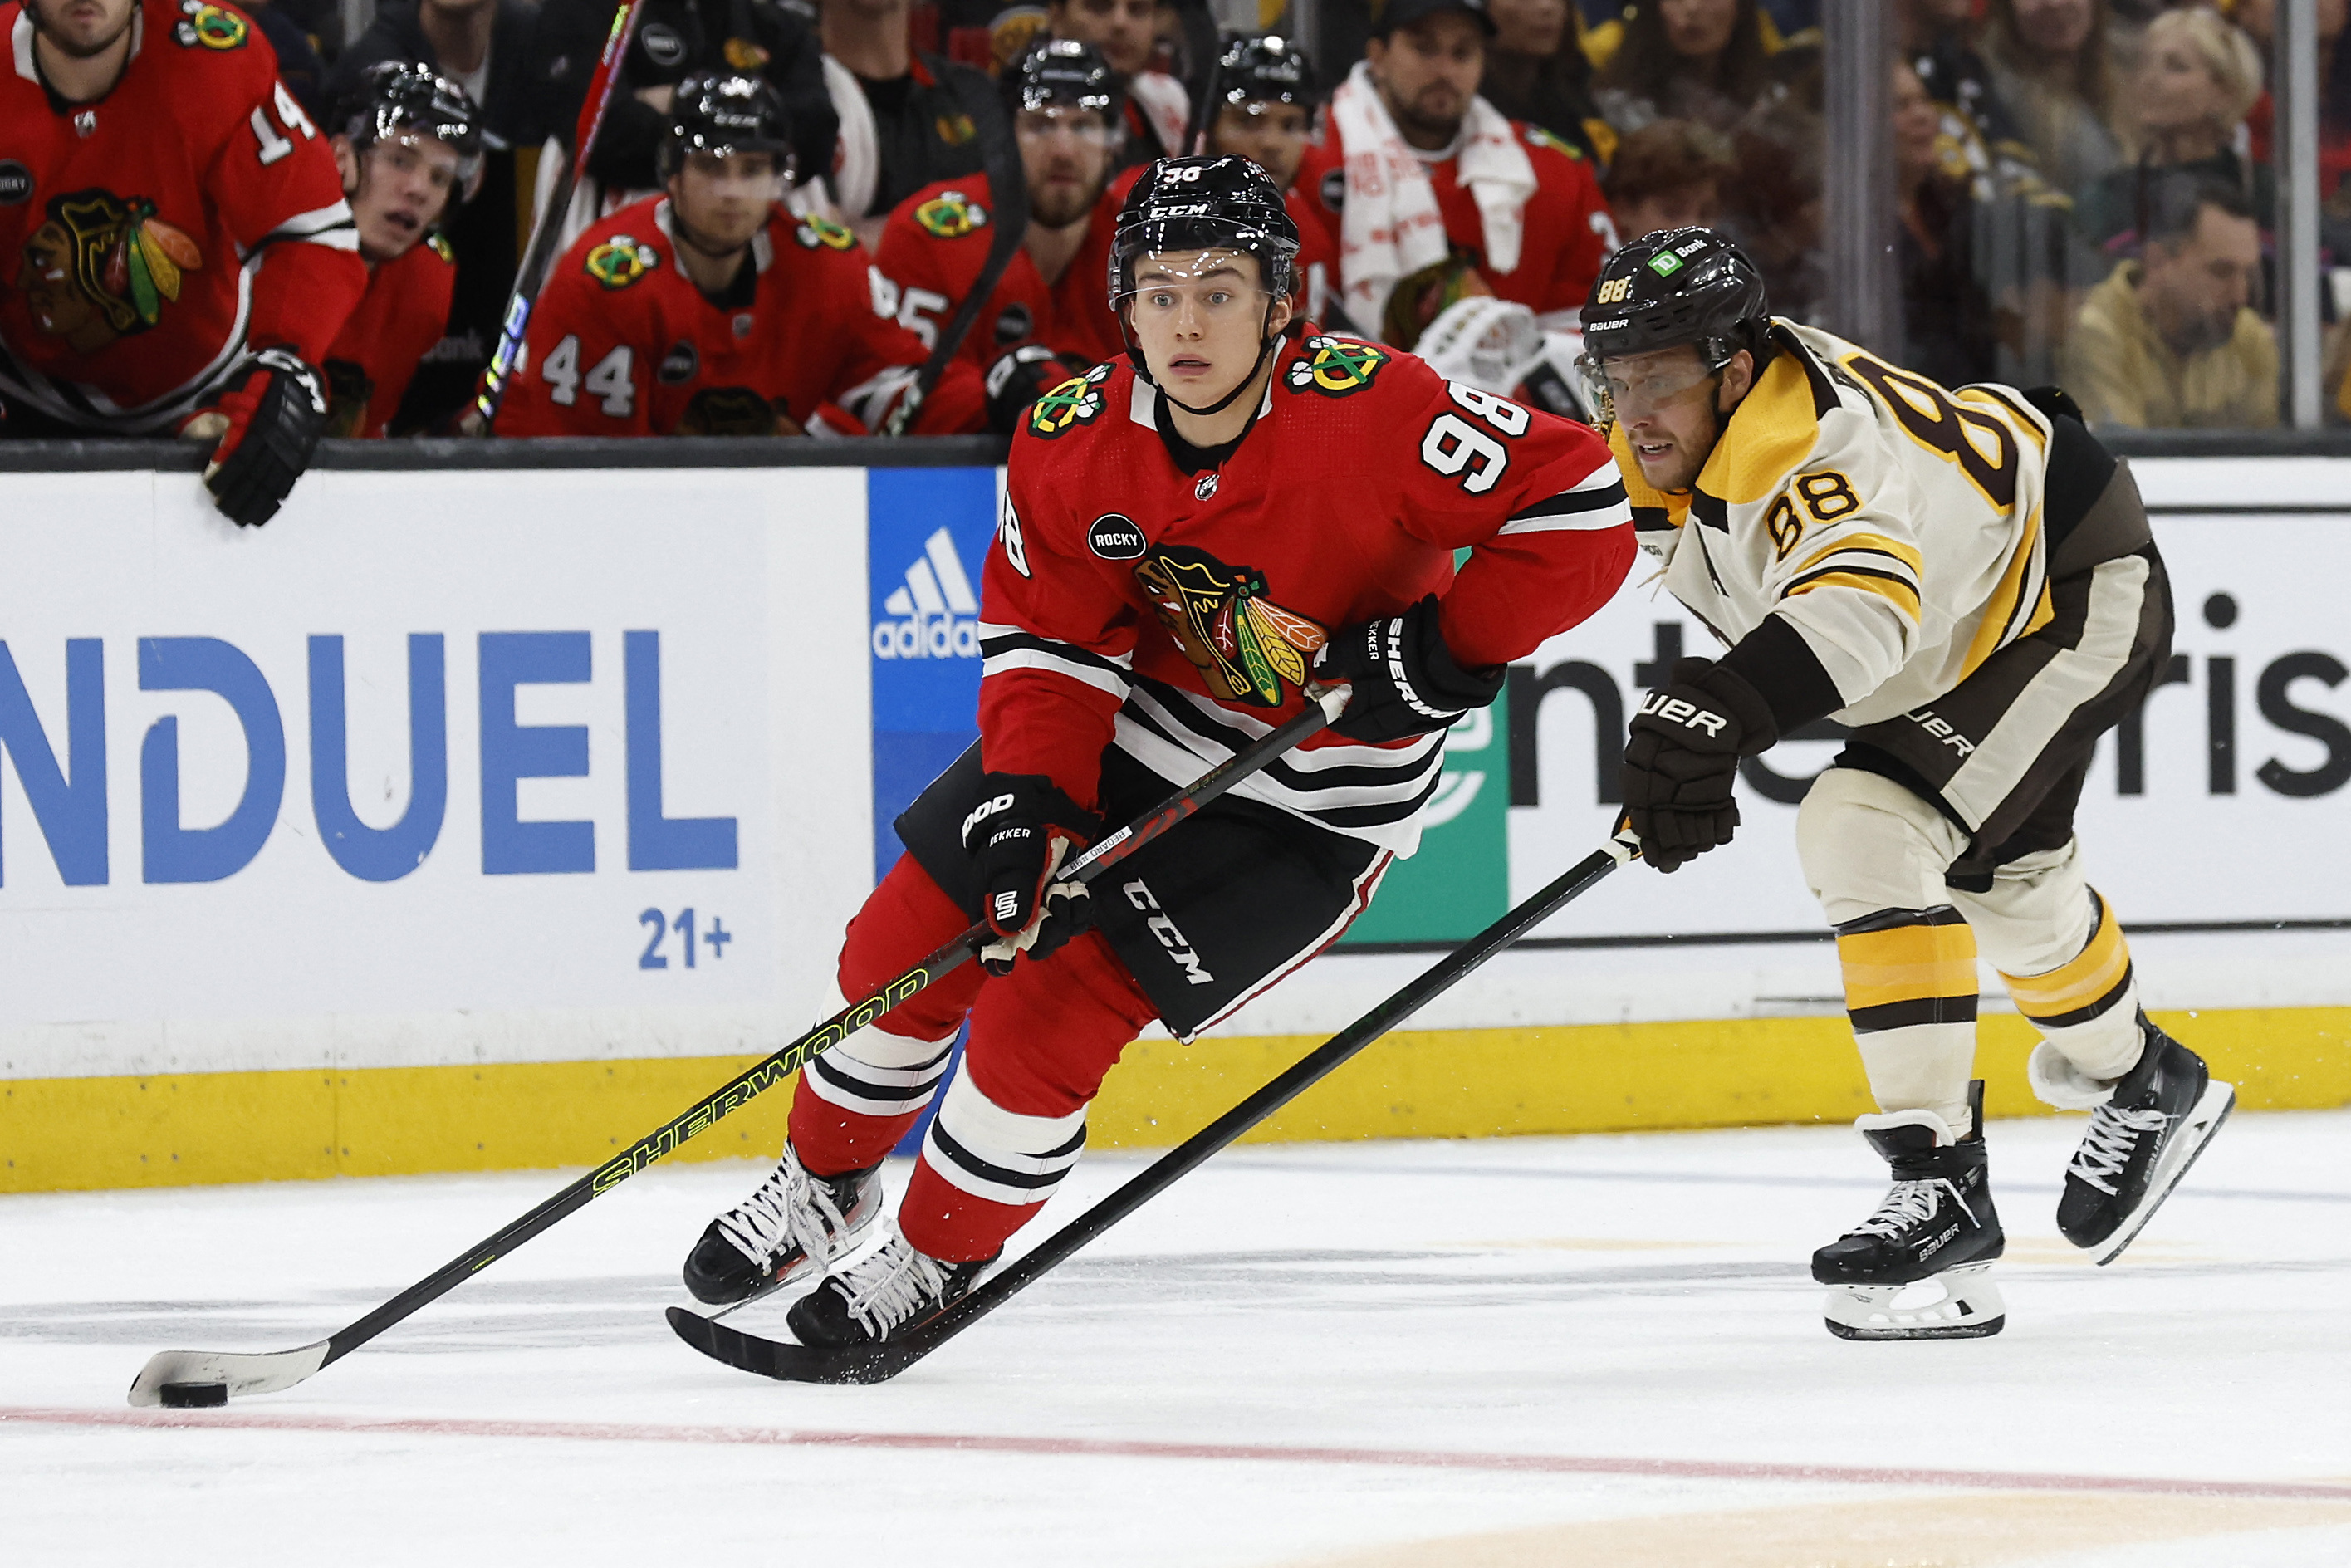 Top draft pick and Blackhawks rookie Bedard scores first NHL goal